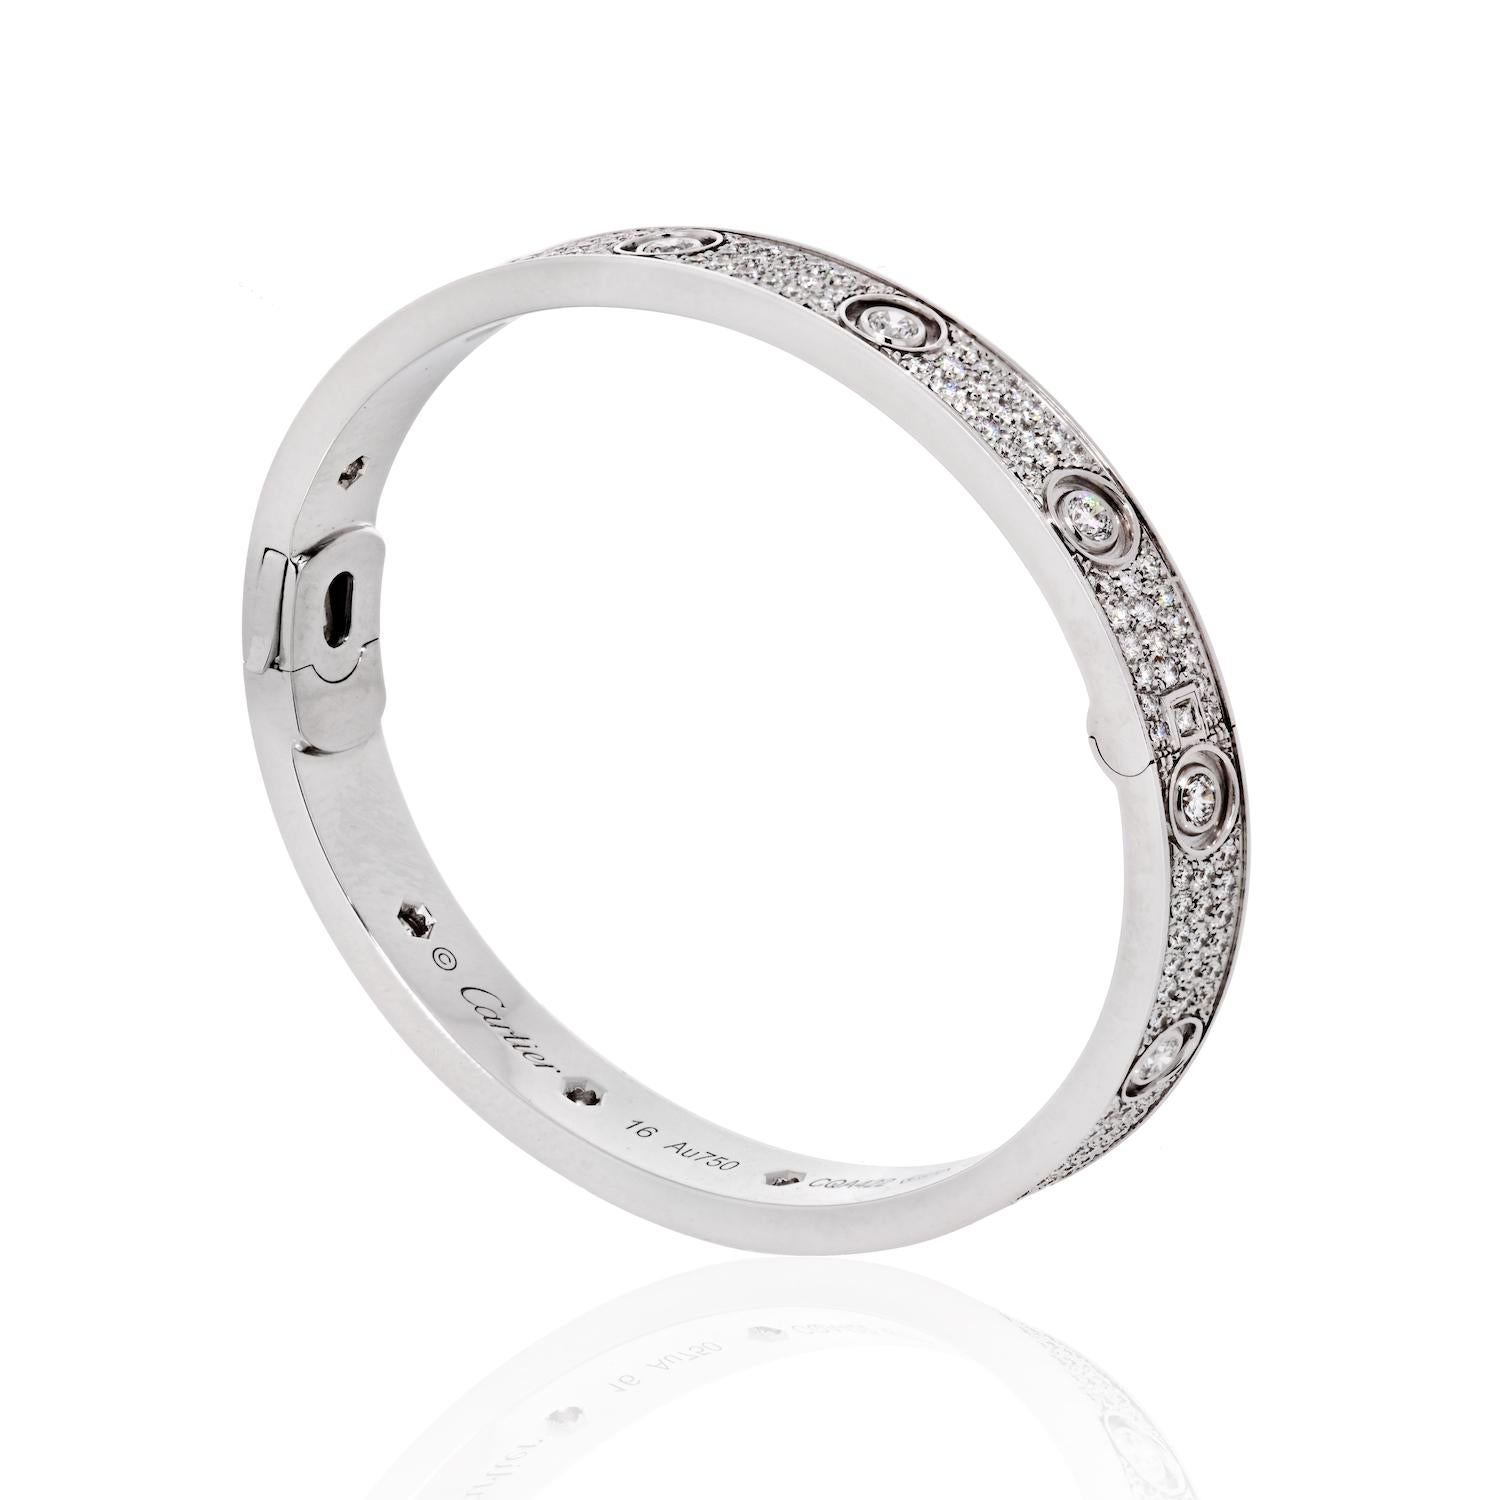 Love bracelet, 18K white gold, set with 216 brilliant-cut diamonds totaling 3.15 carats. Width: 6.7 mm.
Size 16.

A child of 1970s New York, the LOVE collection remains today an iconic symbol of love that transgresses convention. The screw motifs,